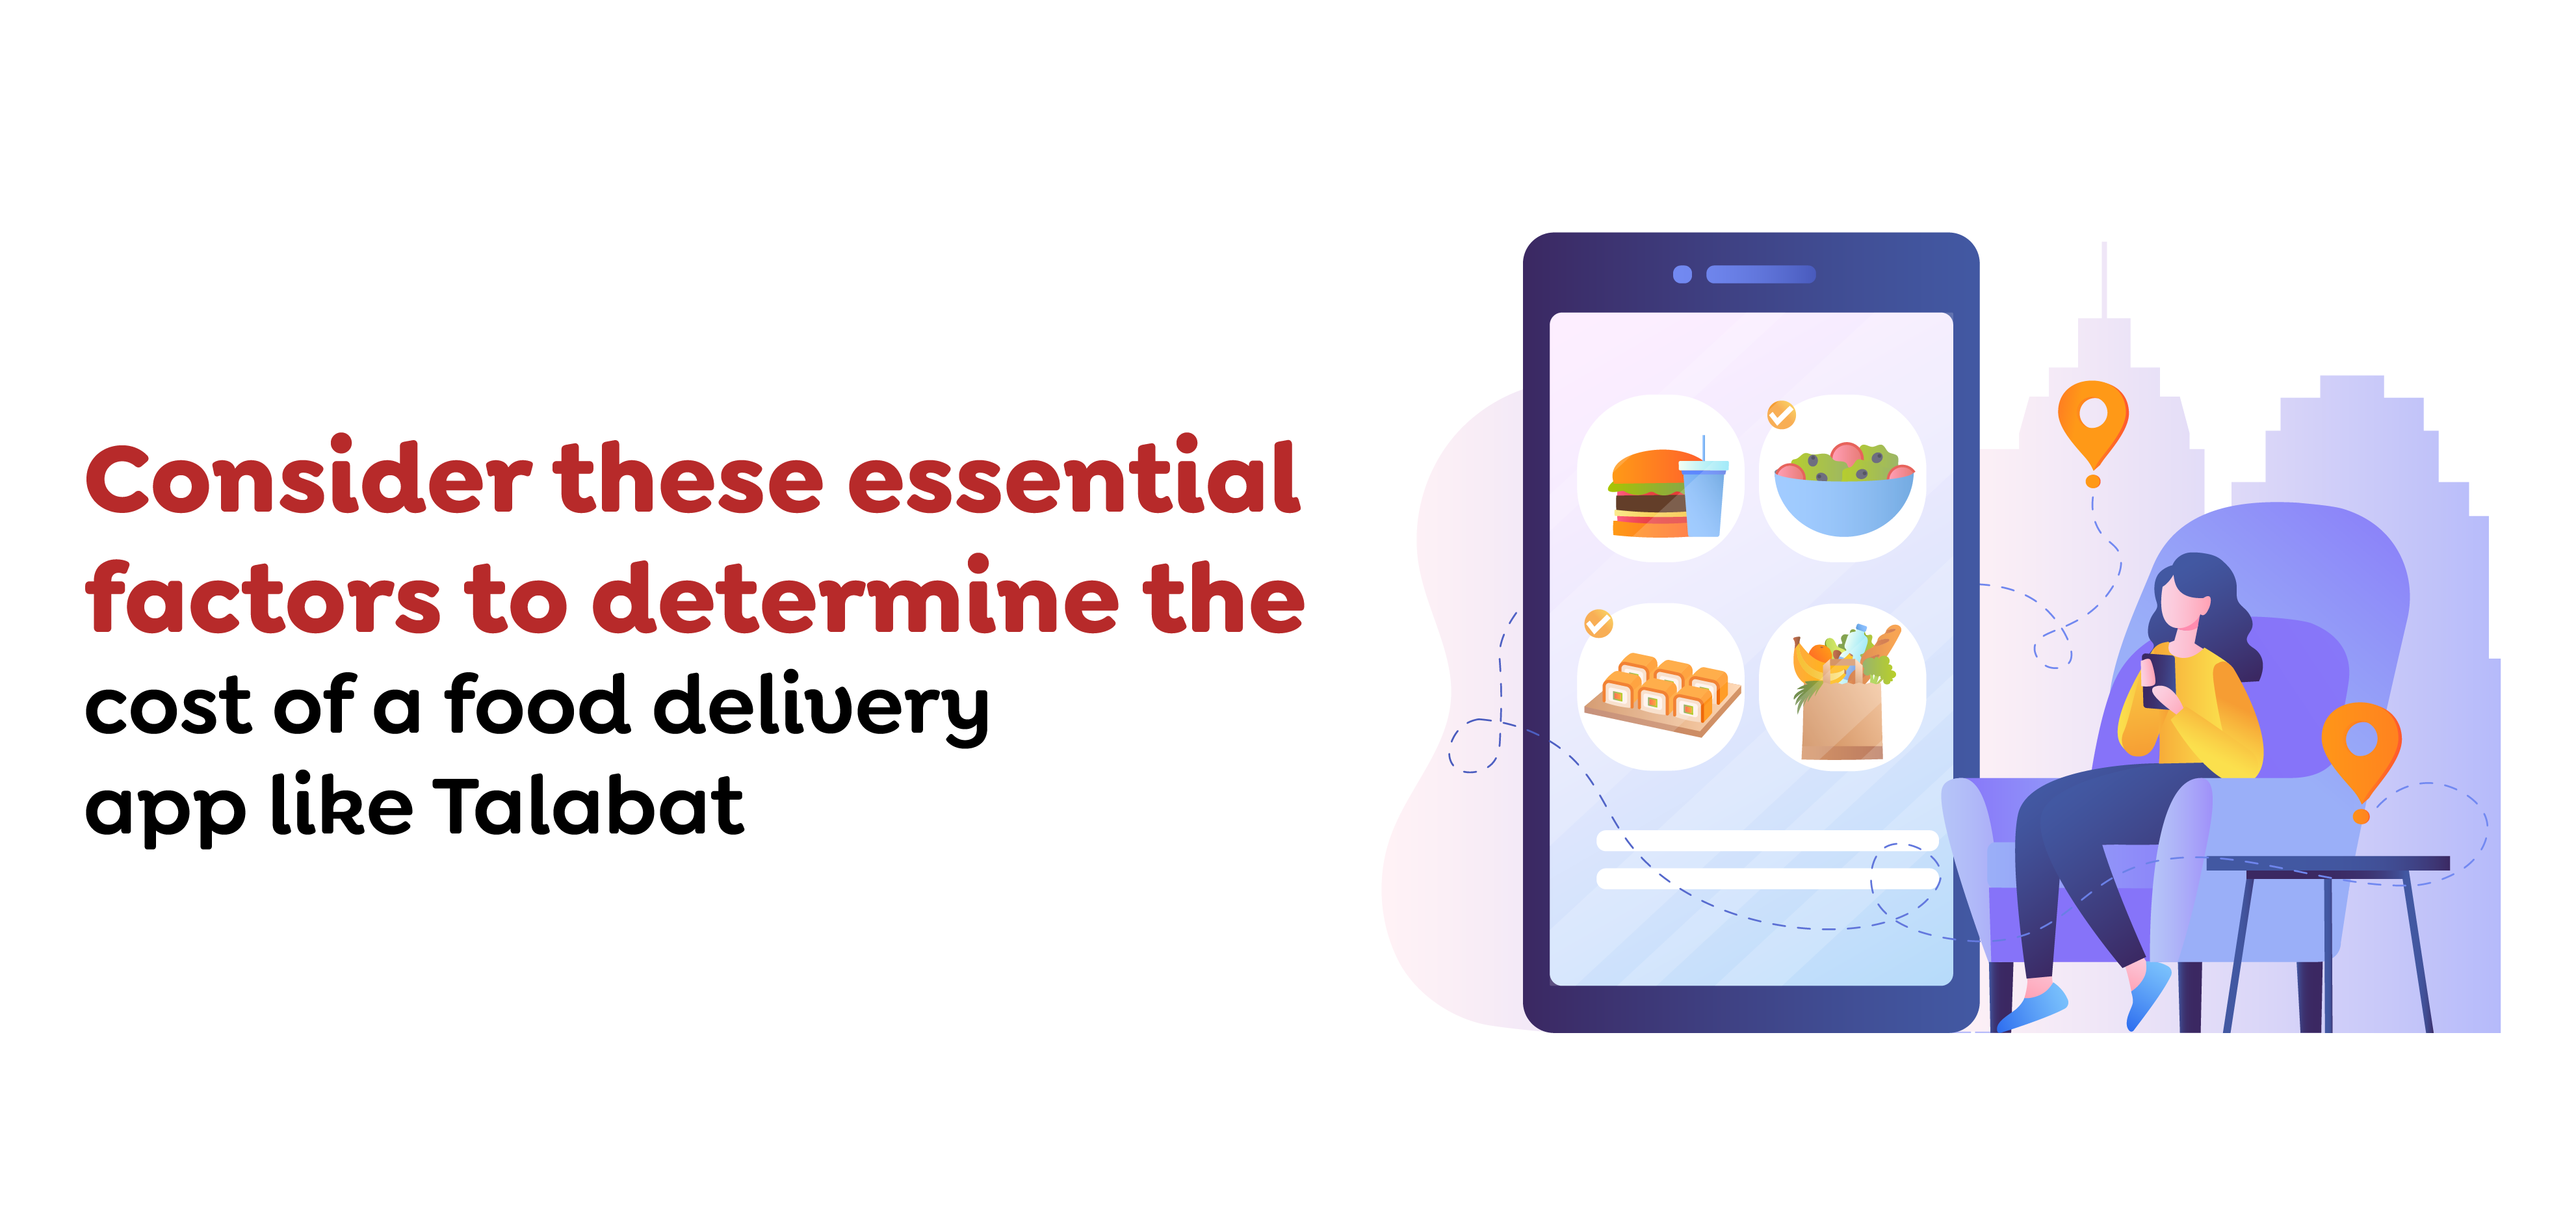 Consider these essential factors to determine the cost of a food delivery app like Talabat